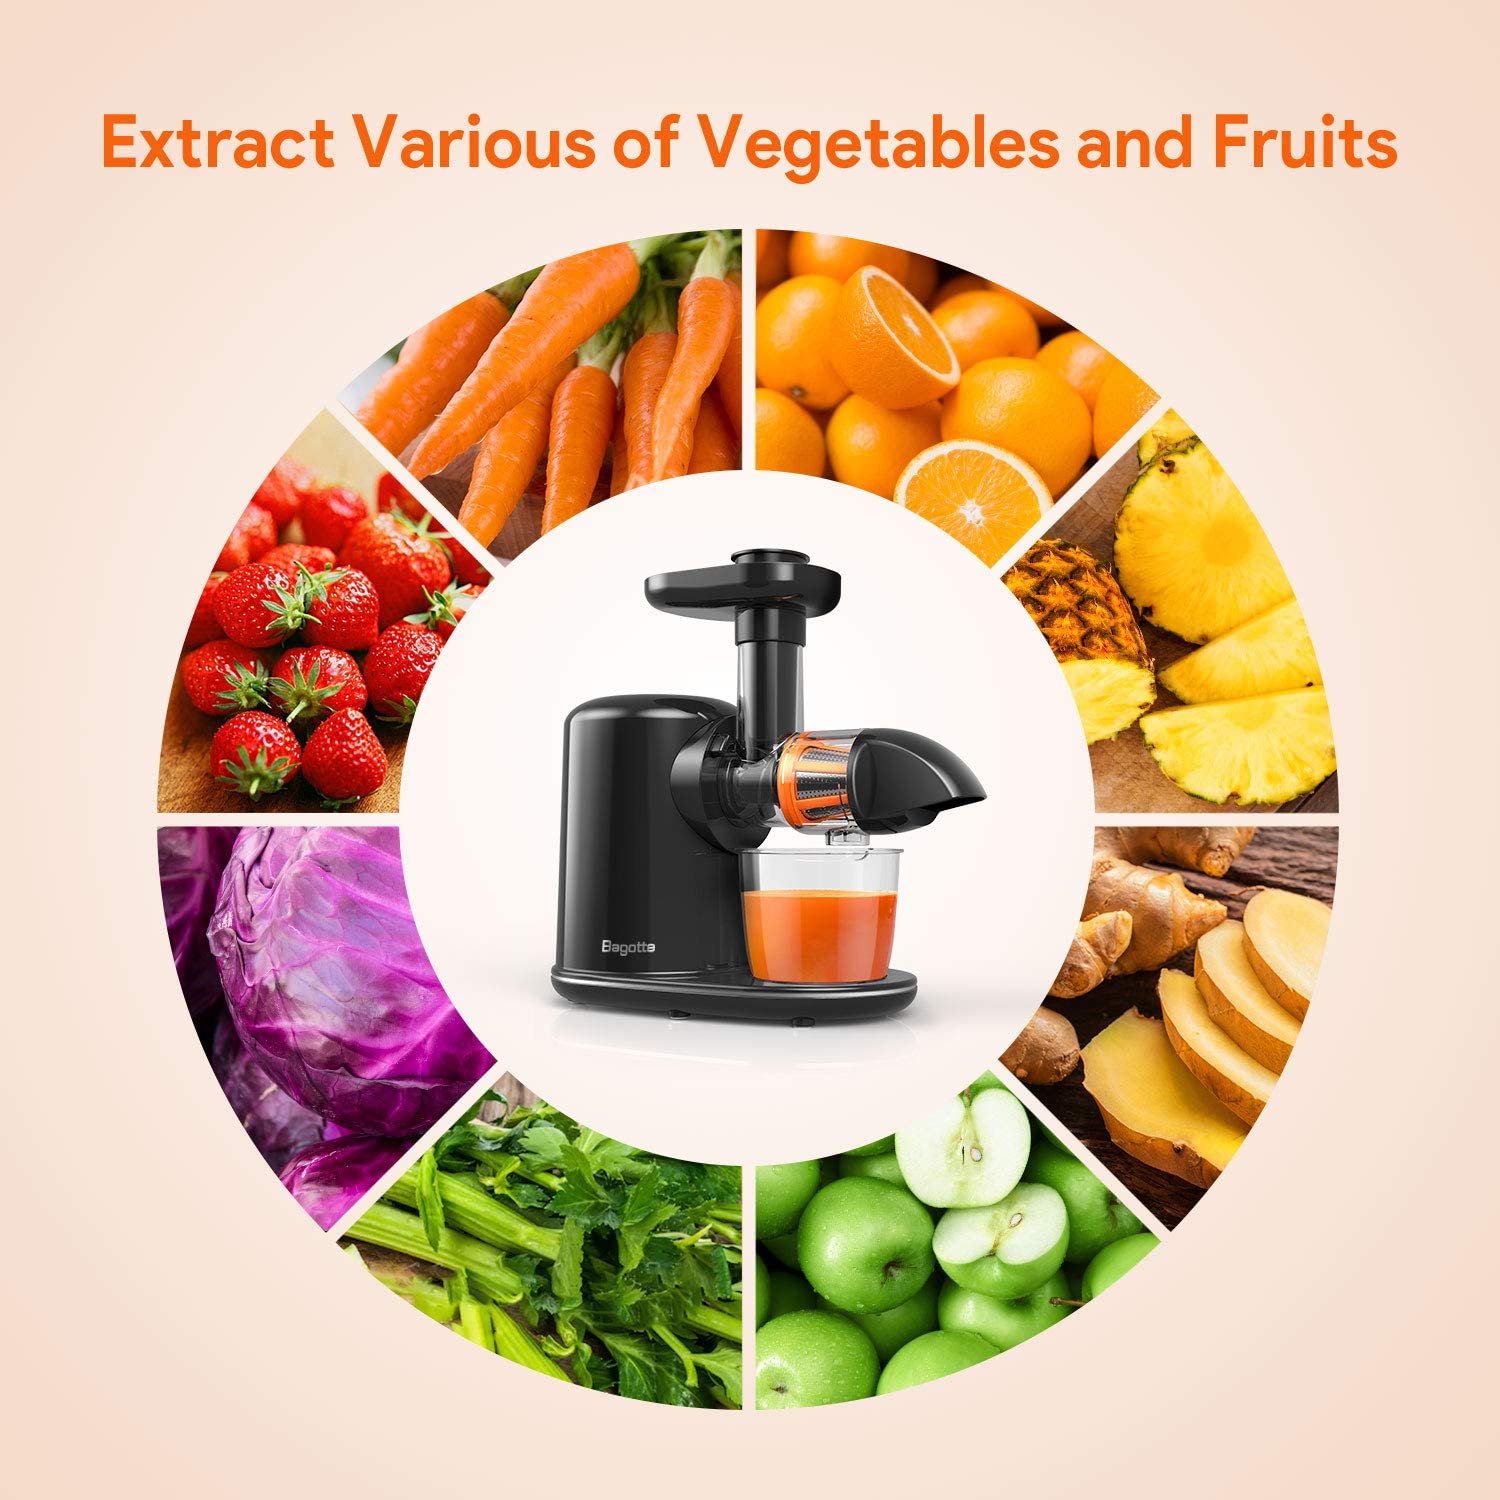 Bagotte Juicer Machines for Vegetables and Fruits Higher Juice Yield and Drier Pulp 150-Watt Quiet Motor & Reverse Function Slow Masticating Juicer Extractor BPA-Free Easy to Use and Clean 